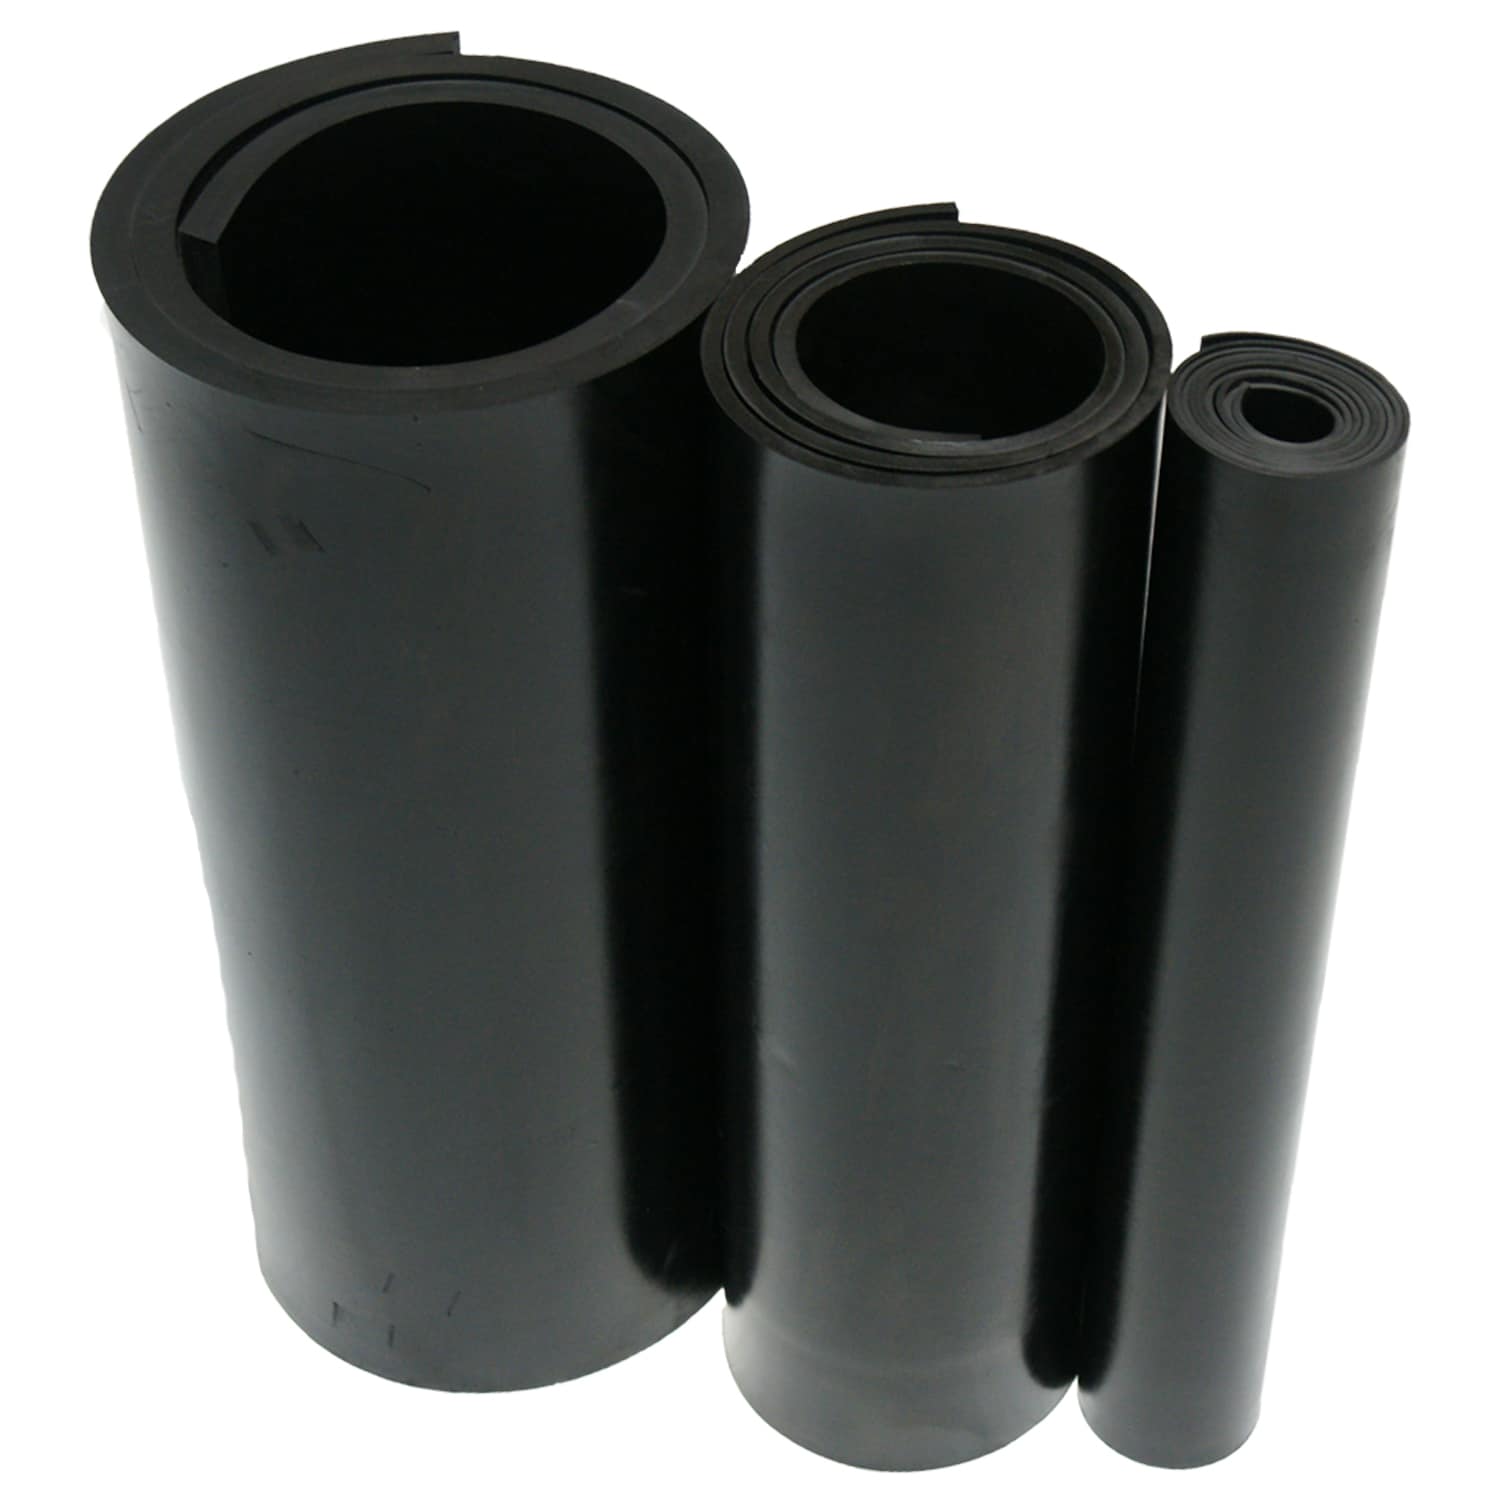 Thin Gauge Nitrile Rubber Sheeting - The Rubber Company